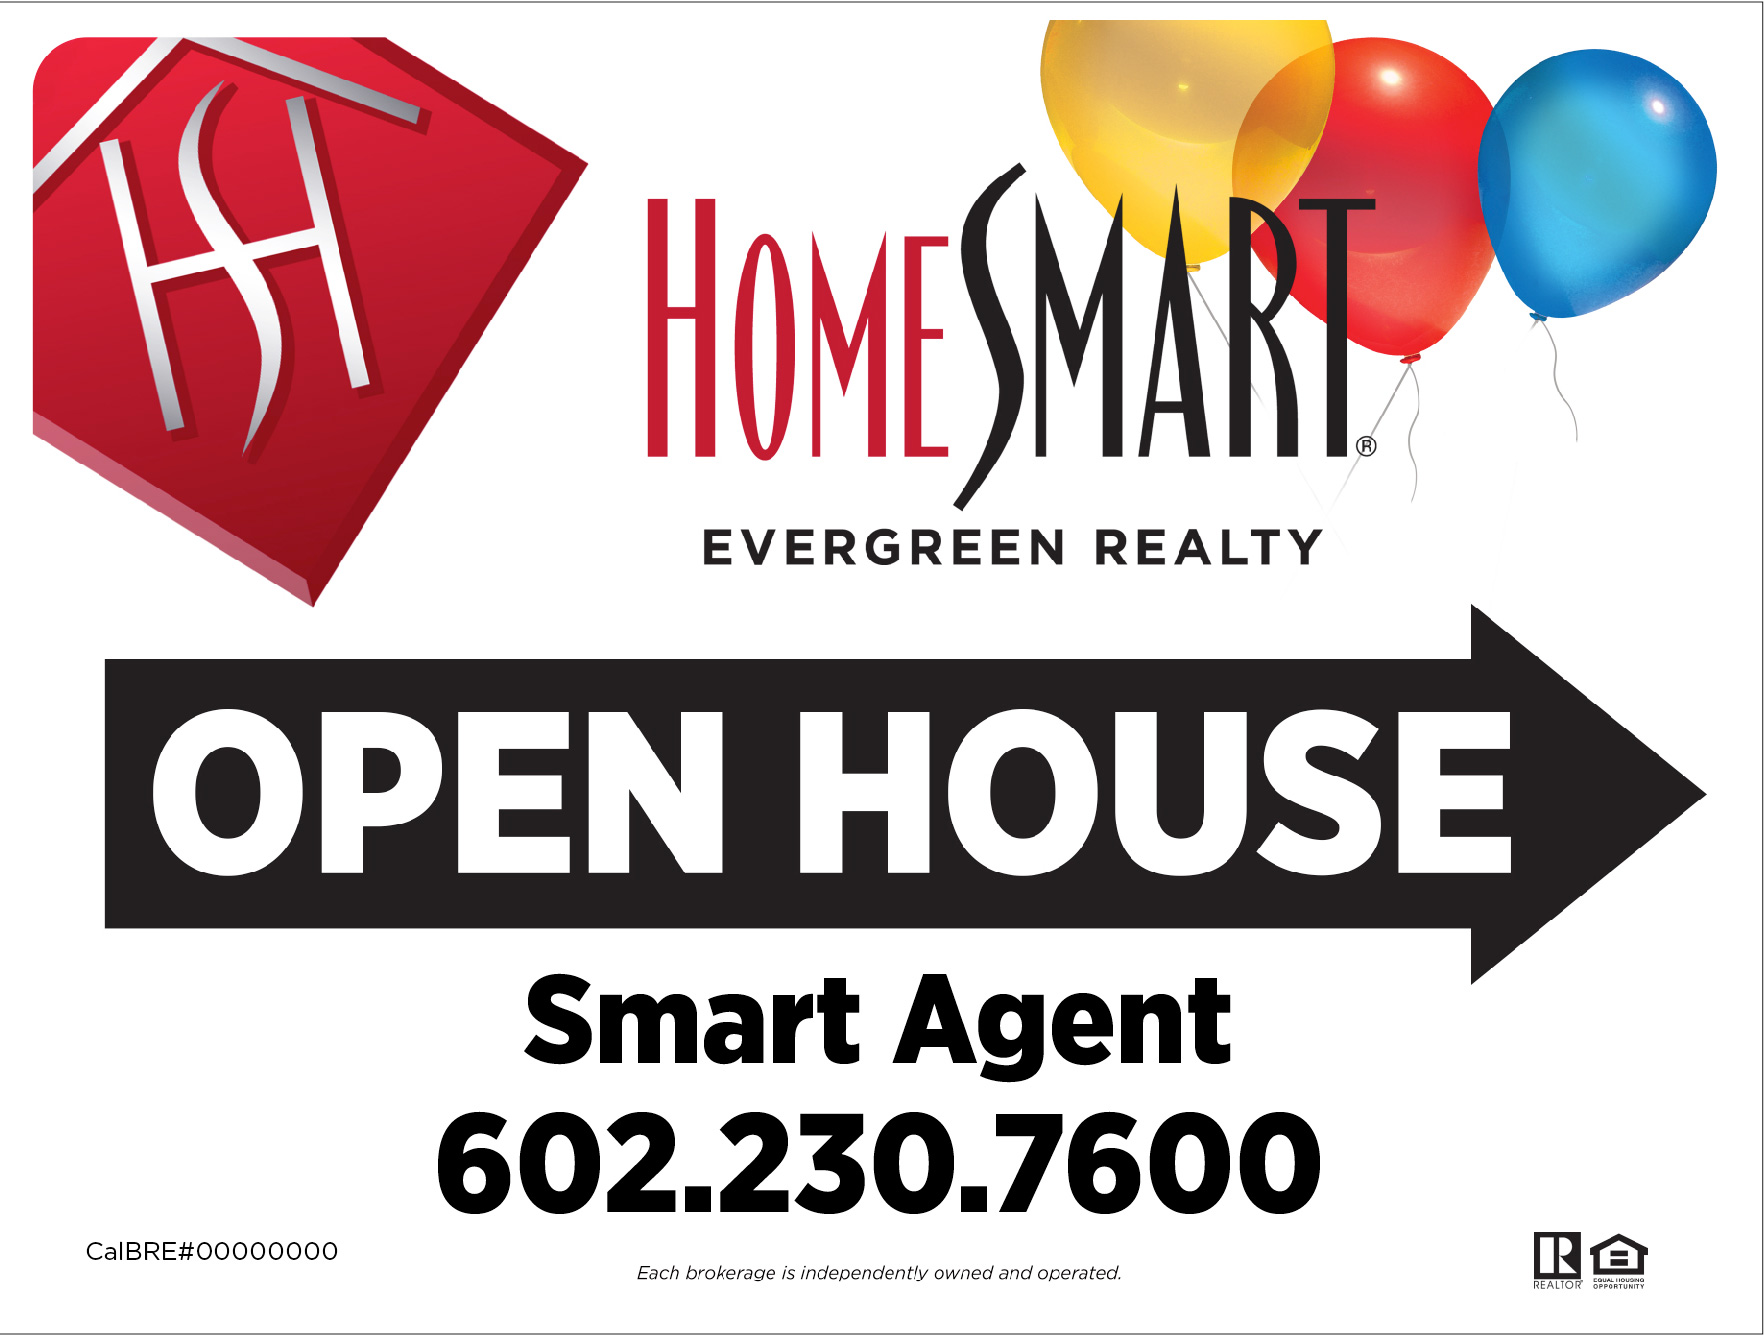 Evergreen open house sign with Balloon